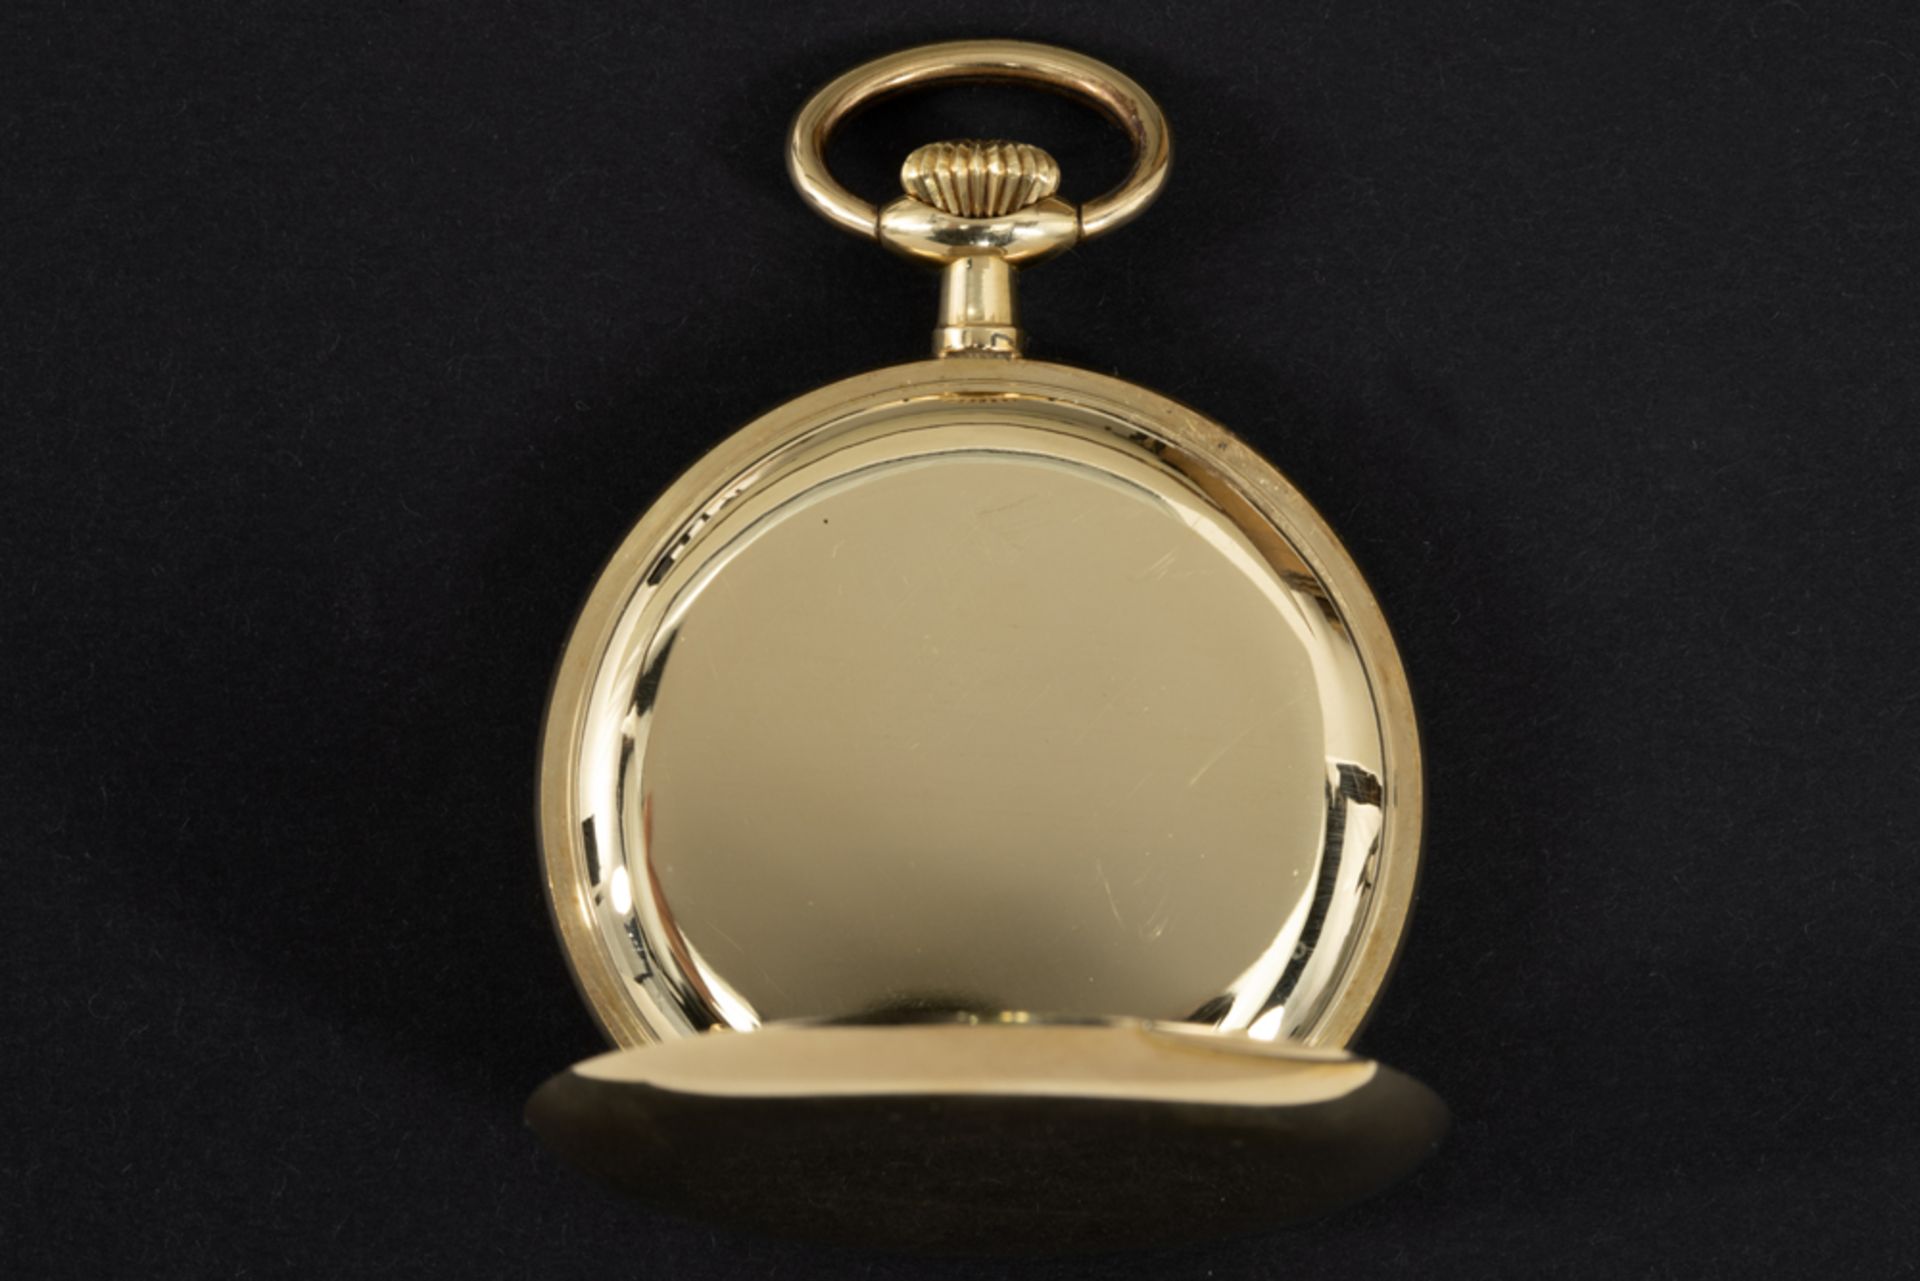 Chronomètre Croissant marked Art Deco pocket watch with its case in yellow gold (18 carat) || - Image 3 of 4